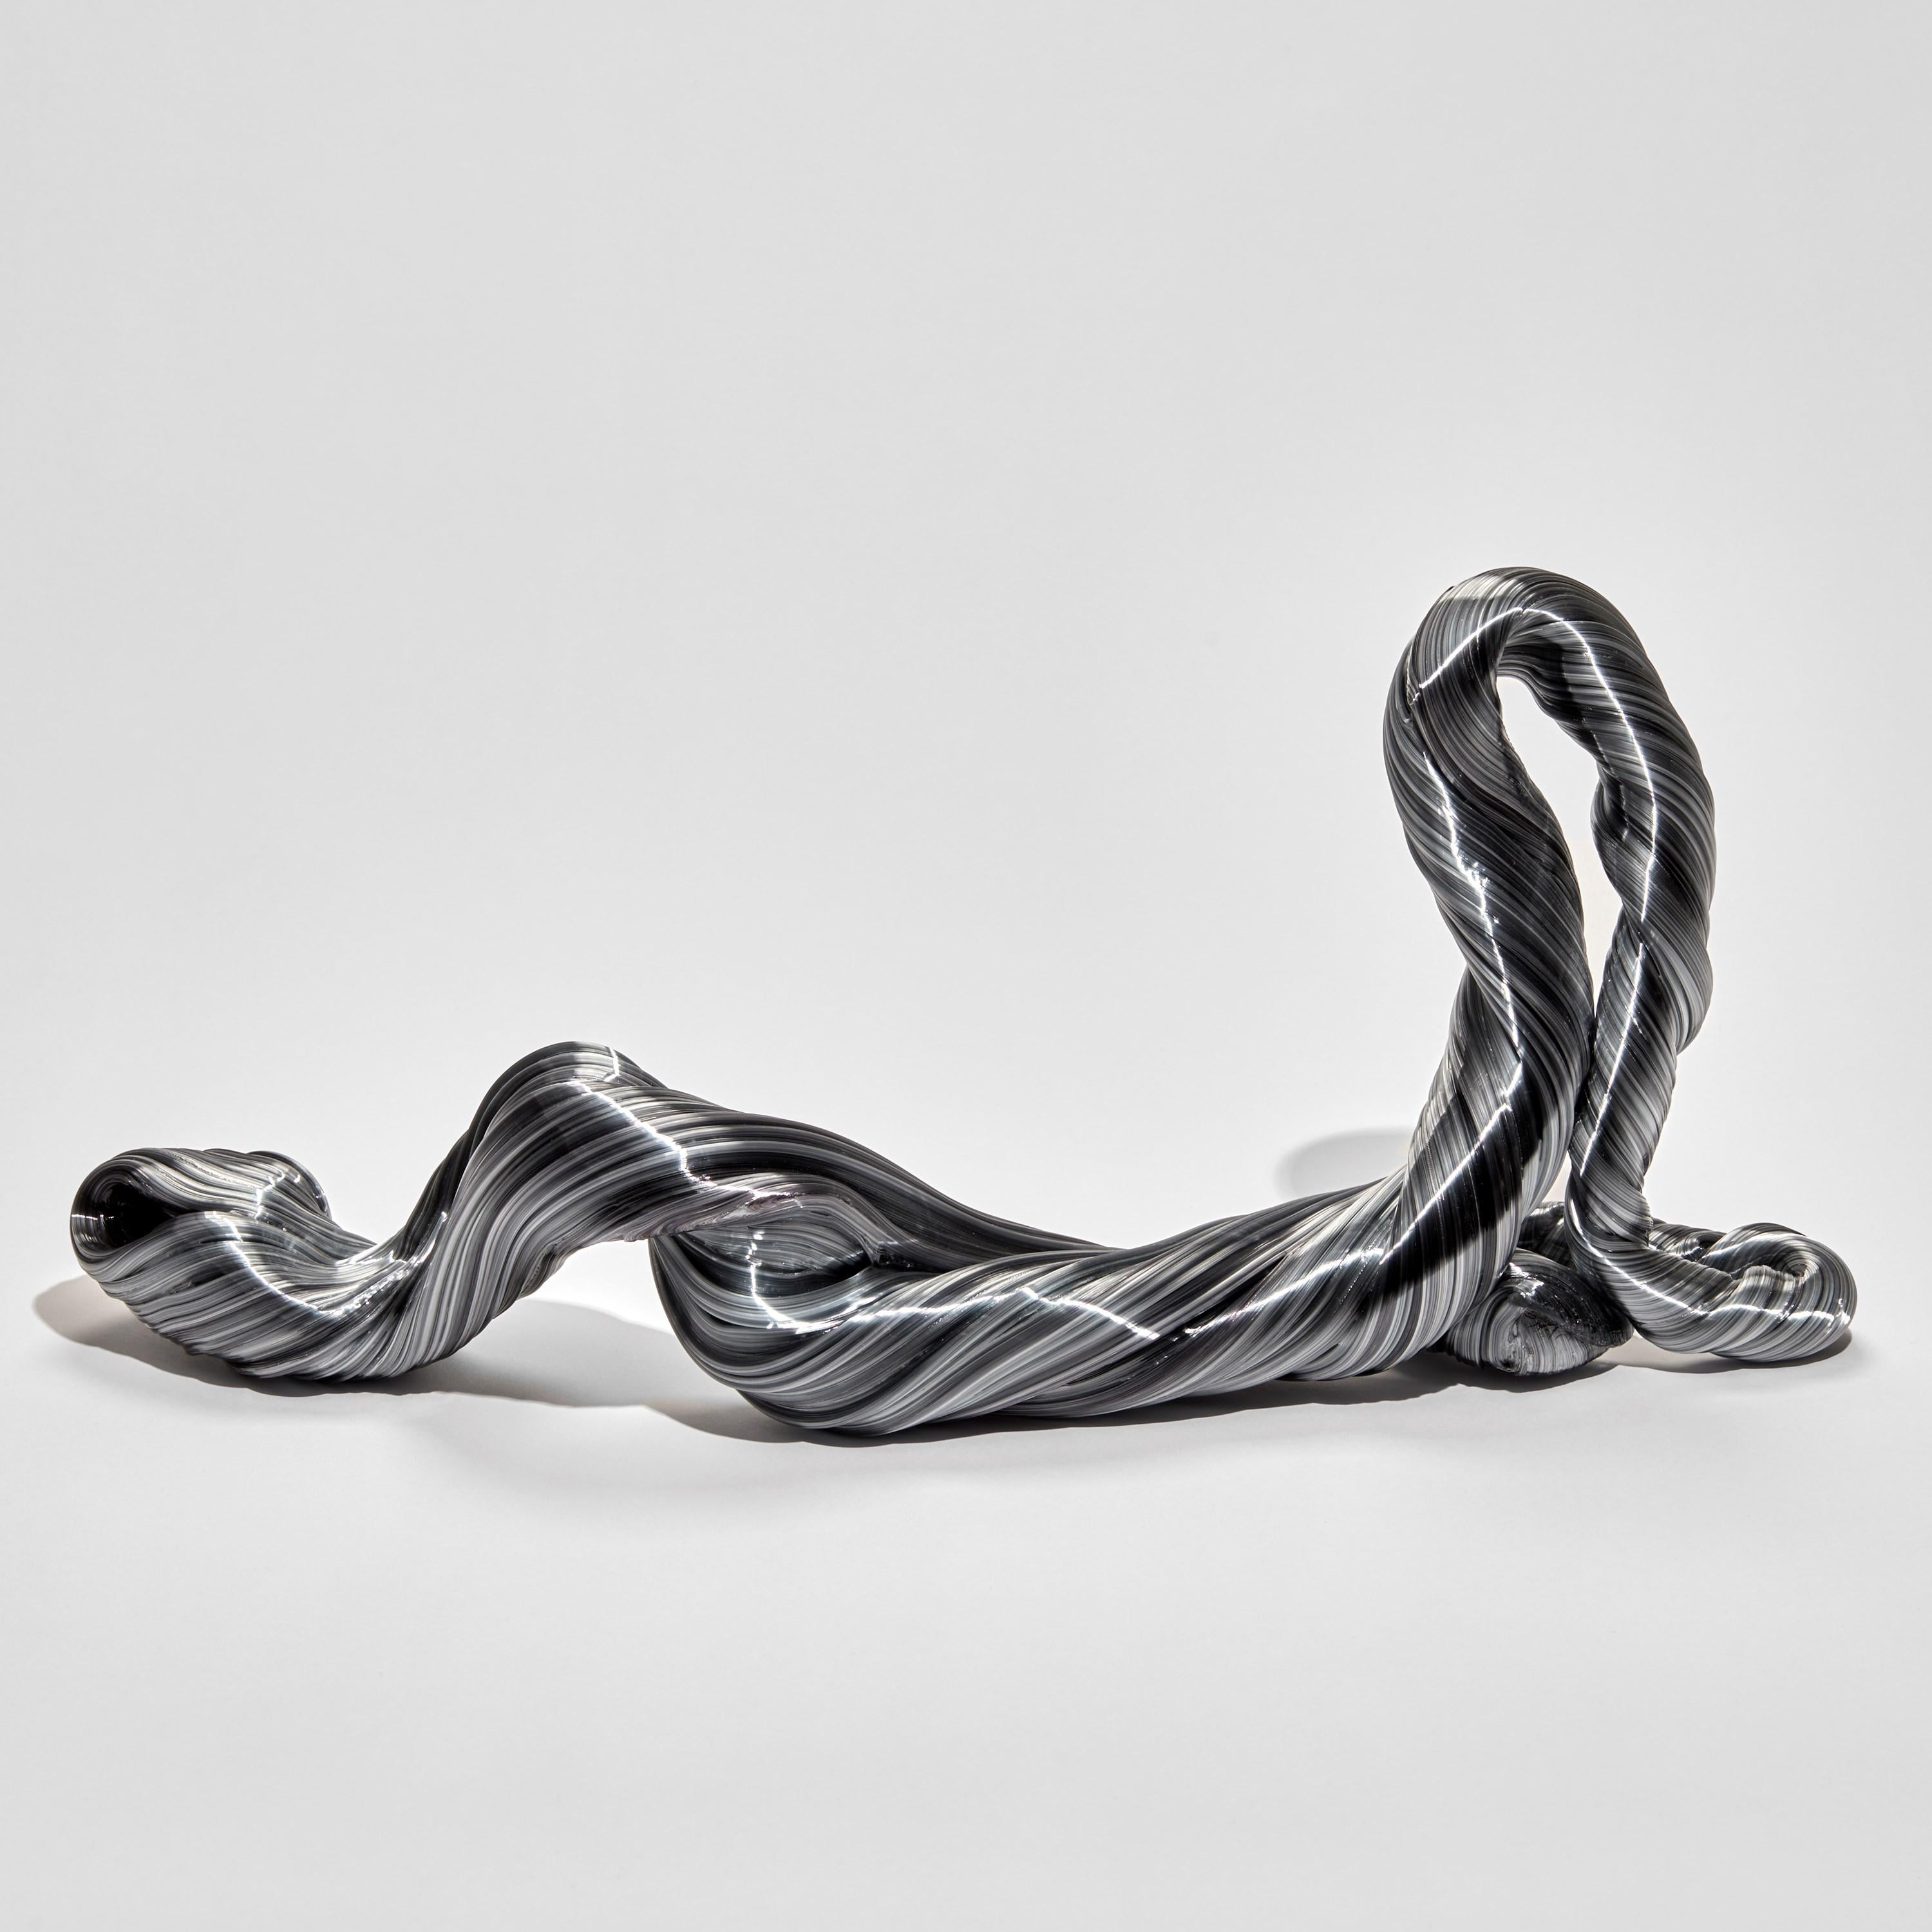 Organic Modern Nonlinear in Black, a Unique Abstract Glass Sculpture by Maria Bang Espersen For Sale